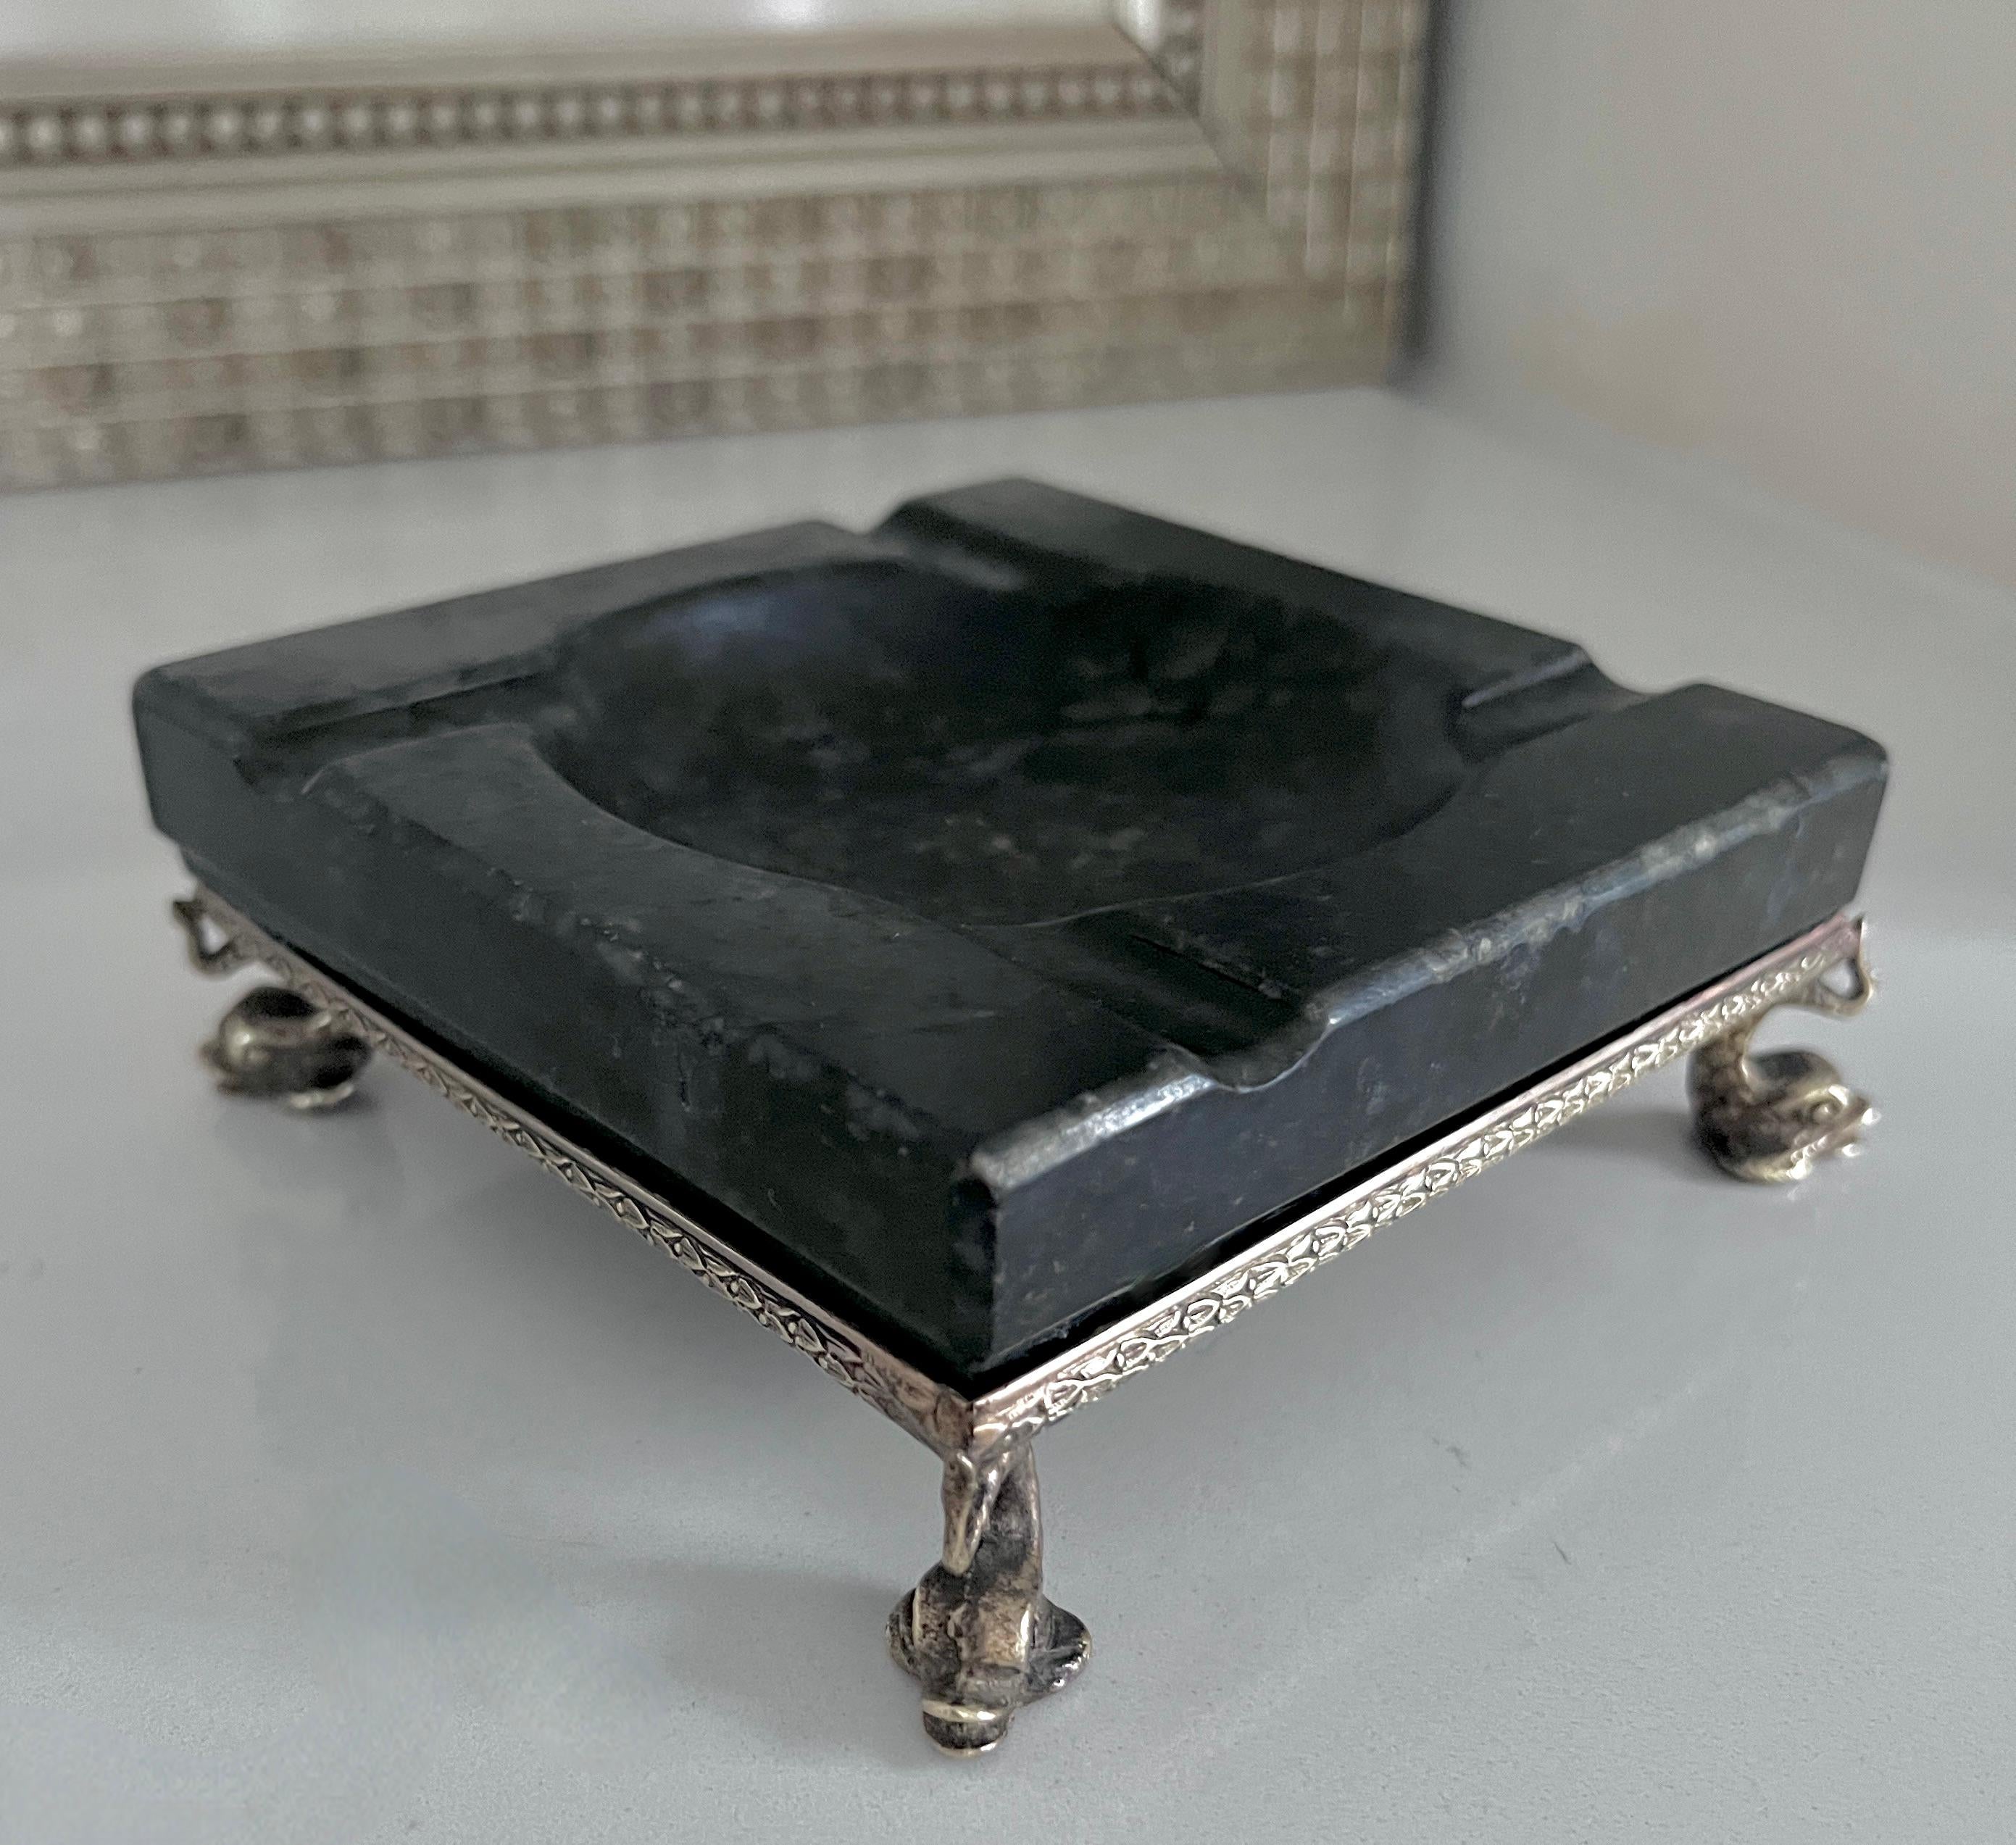 A black stone ashtray sitting in a delicate brass surround held up with legs consisting of Dolphin Serpents.

An elegant piece and a compliment to any bar, cocktail table or outdoor space - a sophisticated and sexy piece, ready for your Cigars,